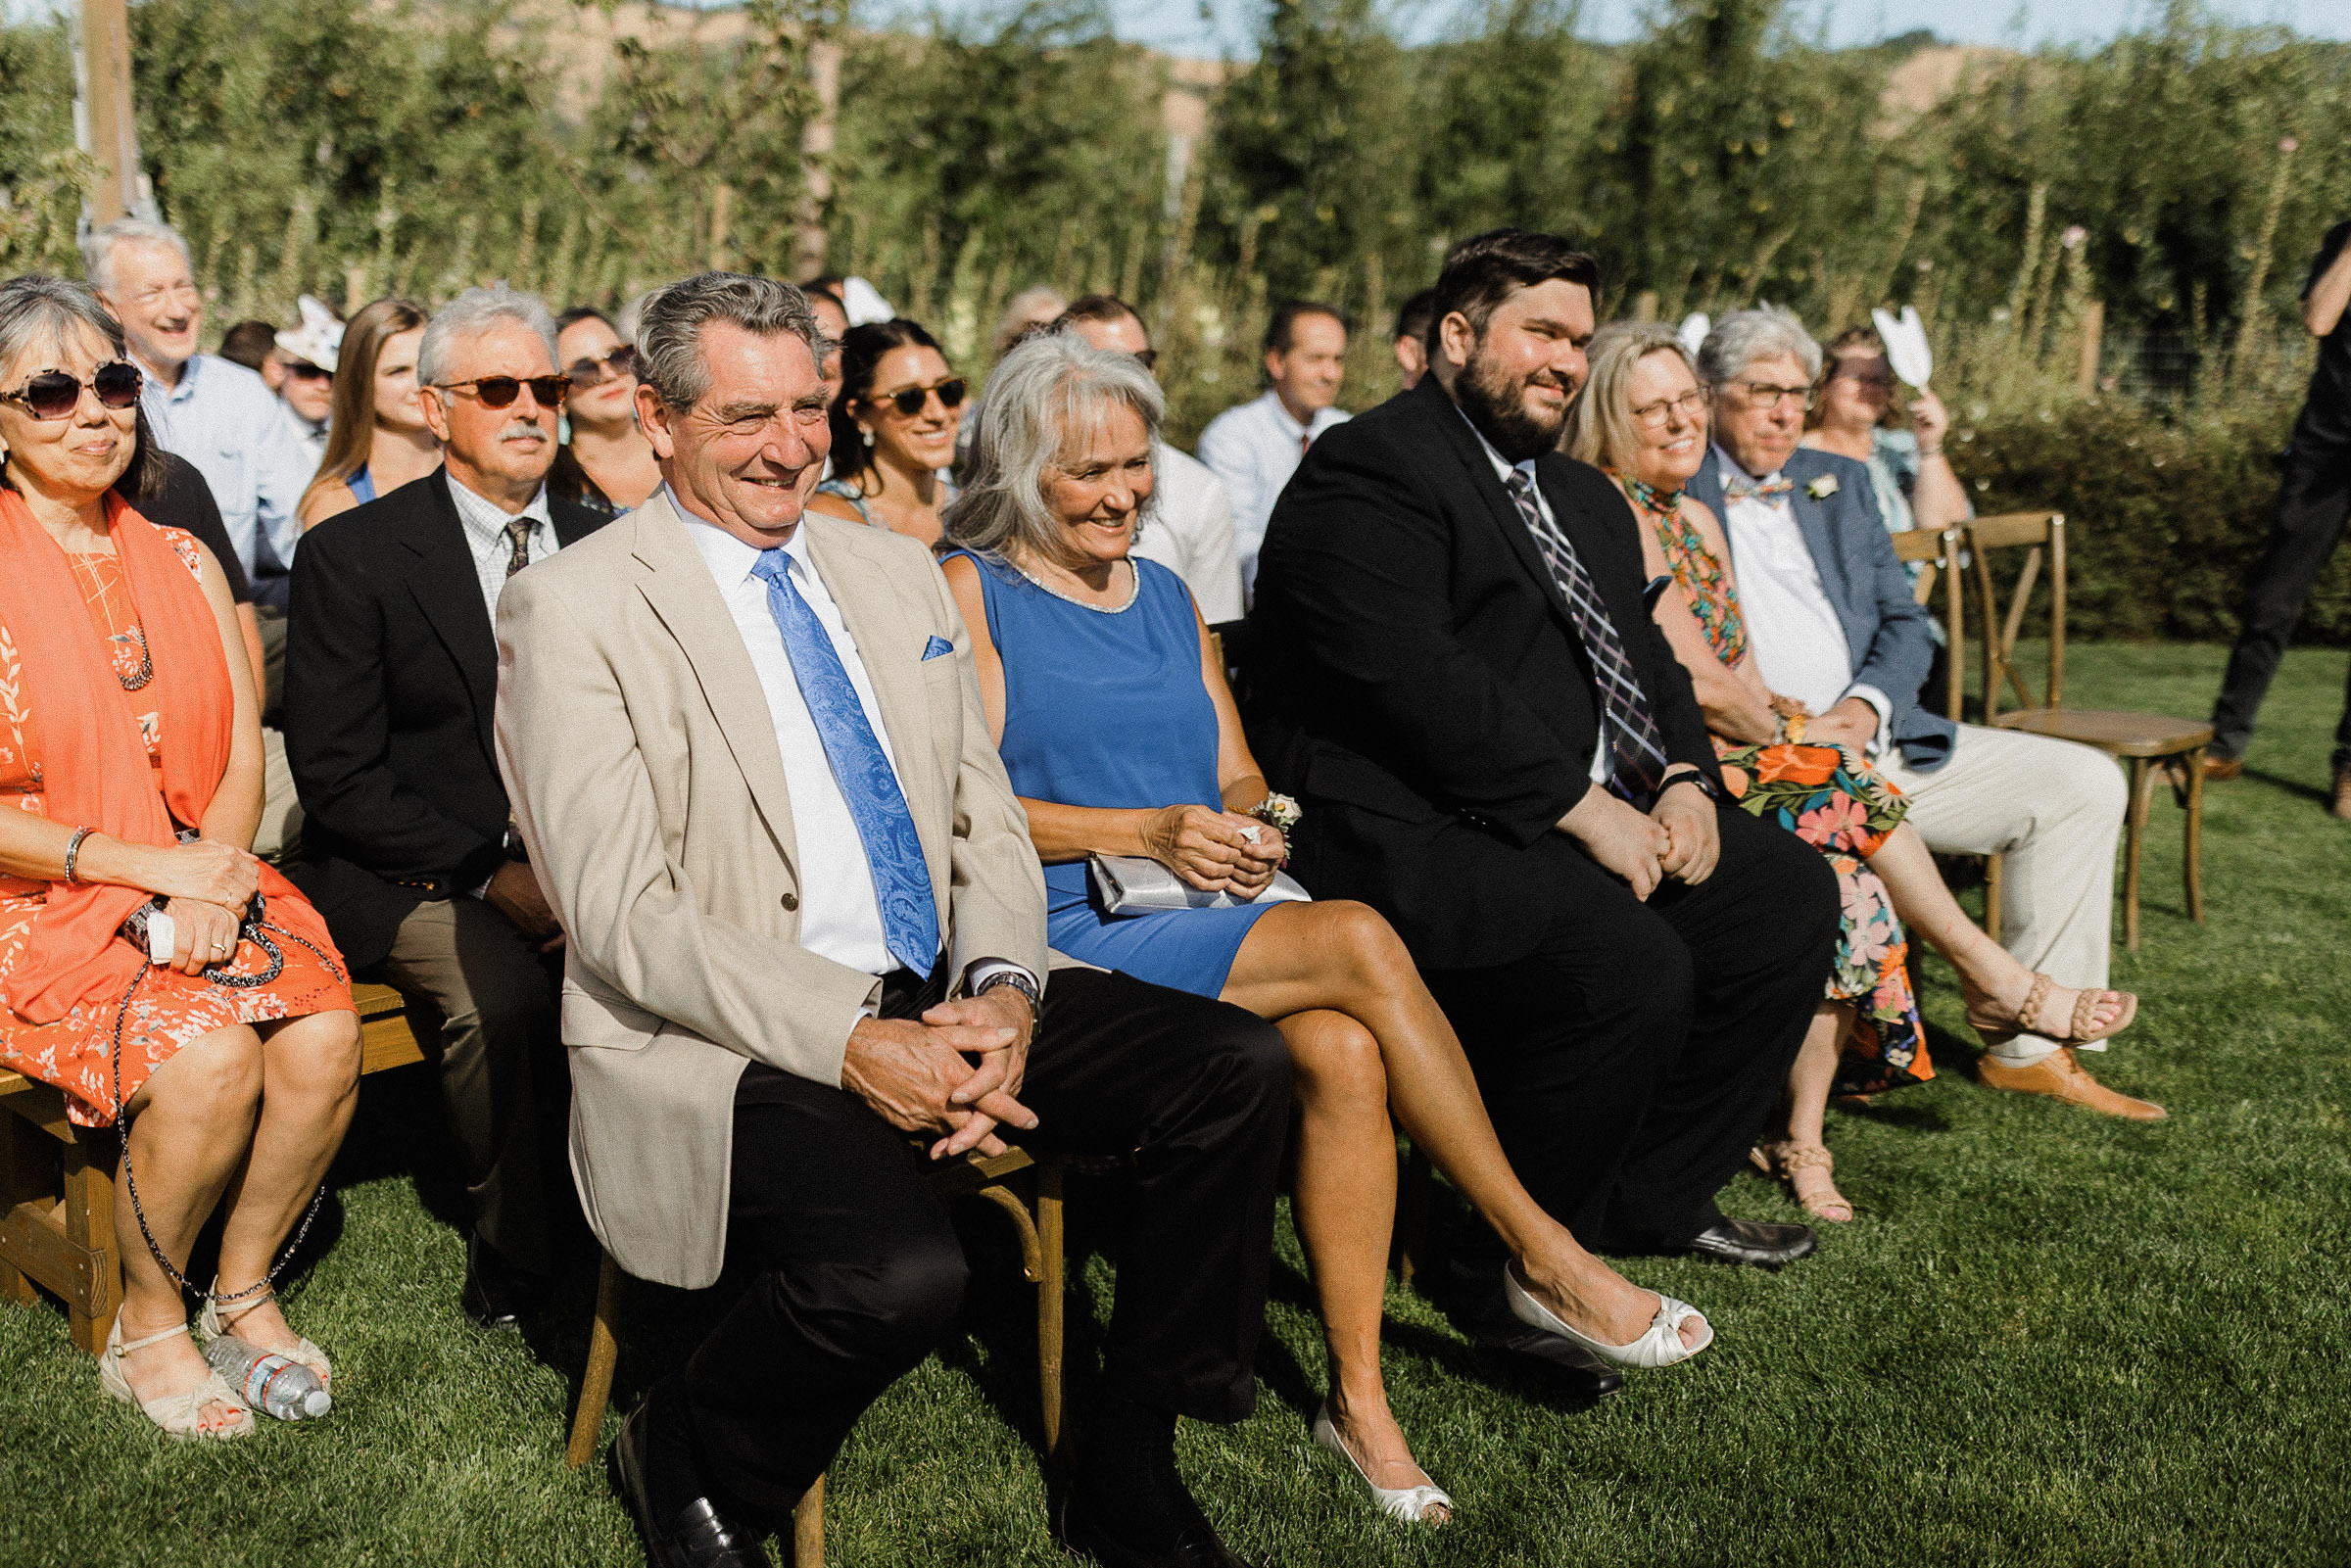 Guests smile during wedding ceremony